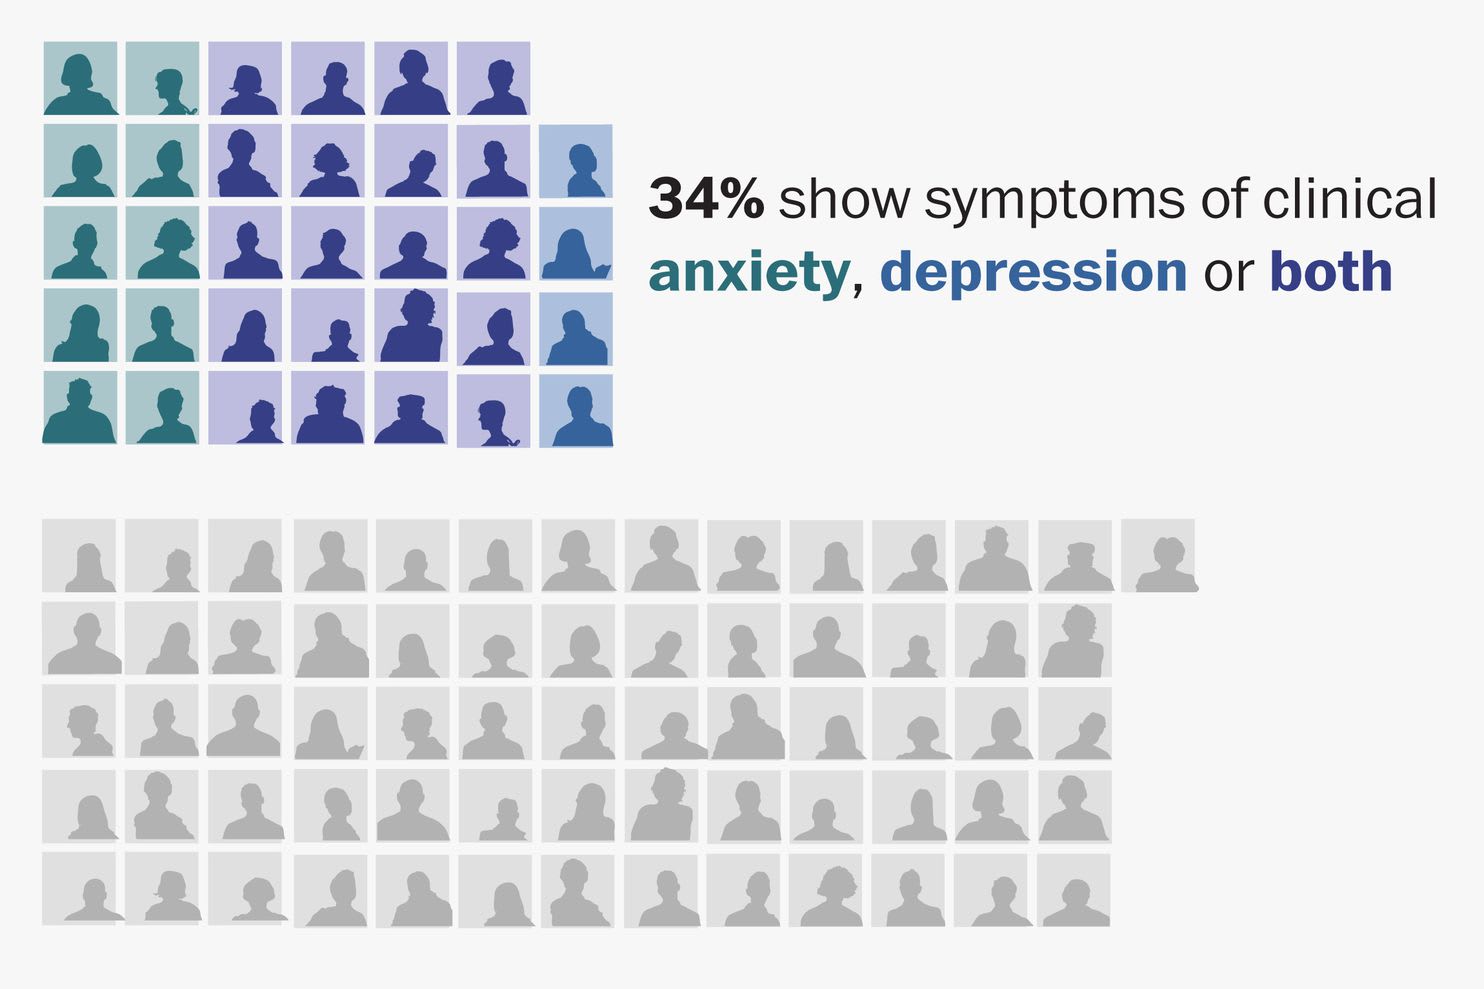 A third of Americans now show signs of clinical anxiety or depression, Census Bureau finds amid coronavirus pandemic